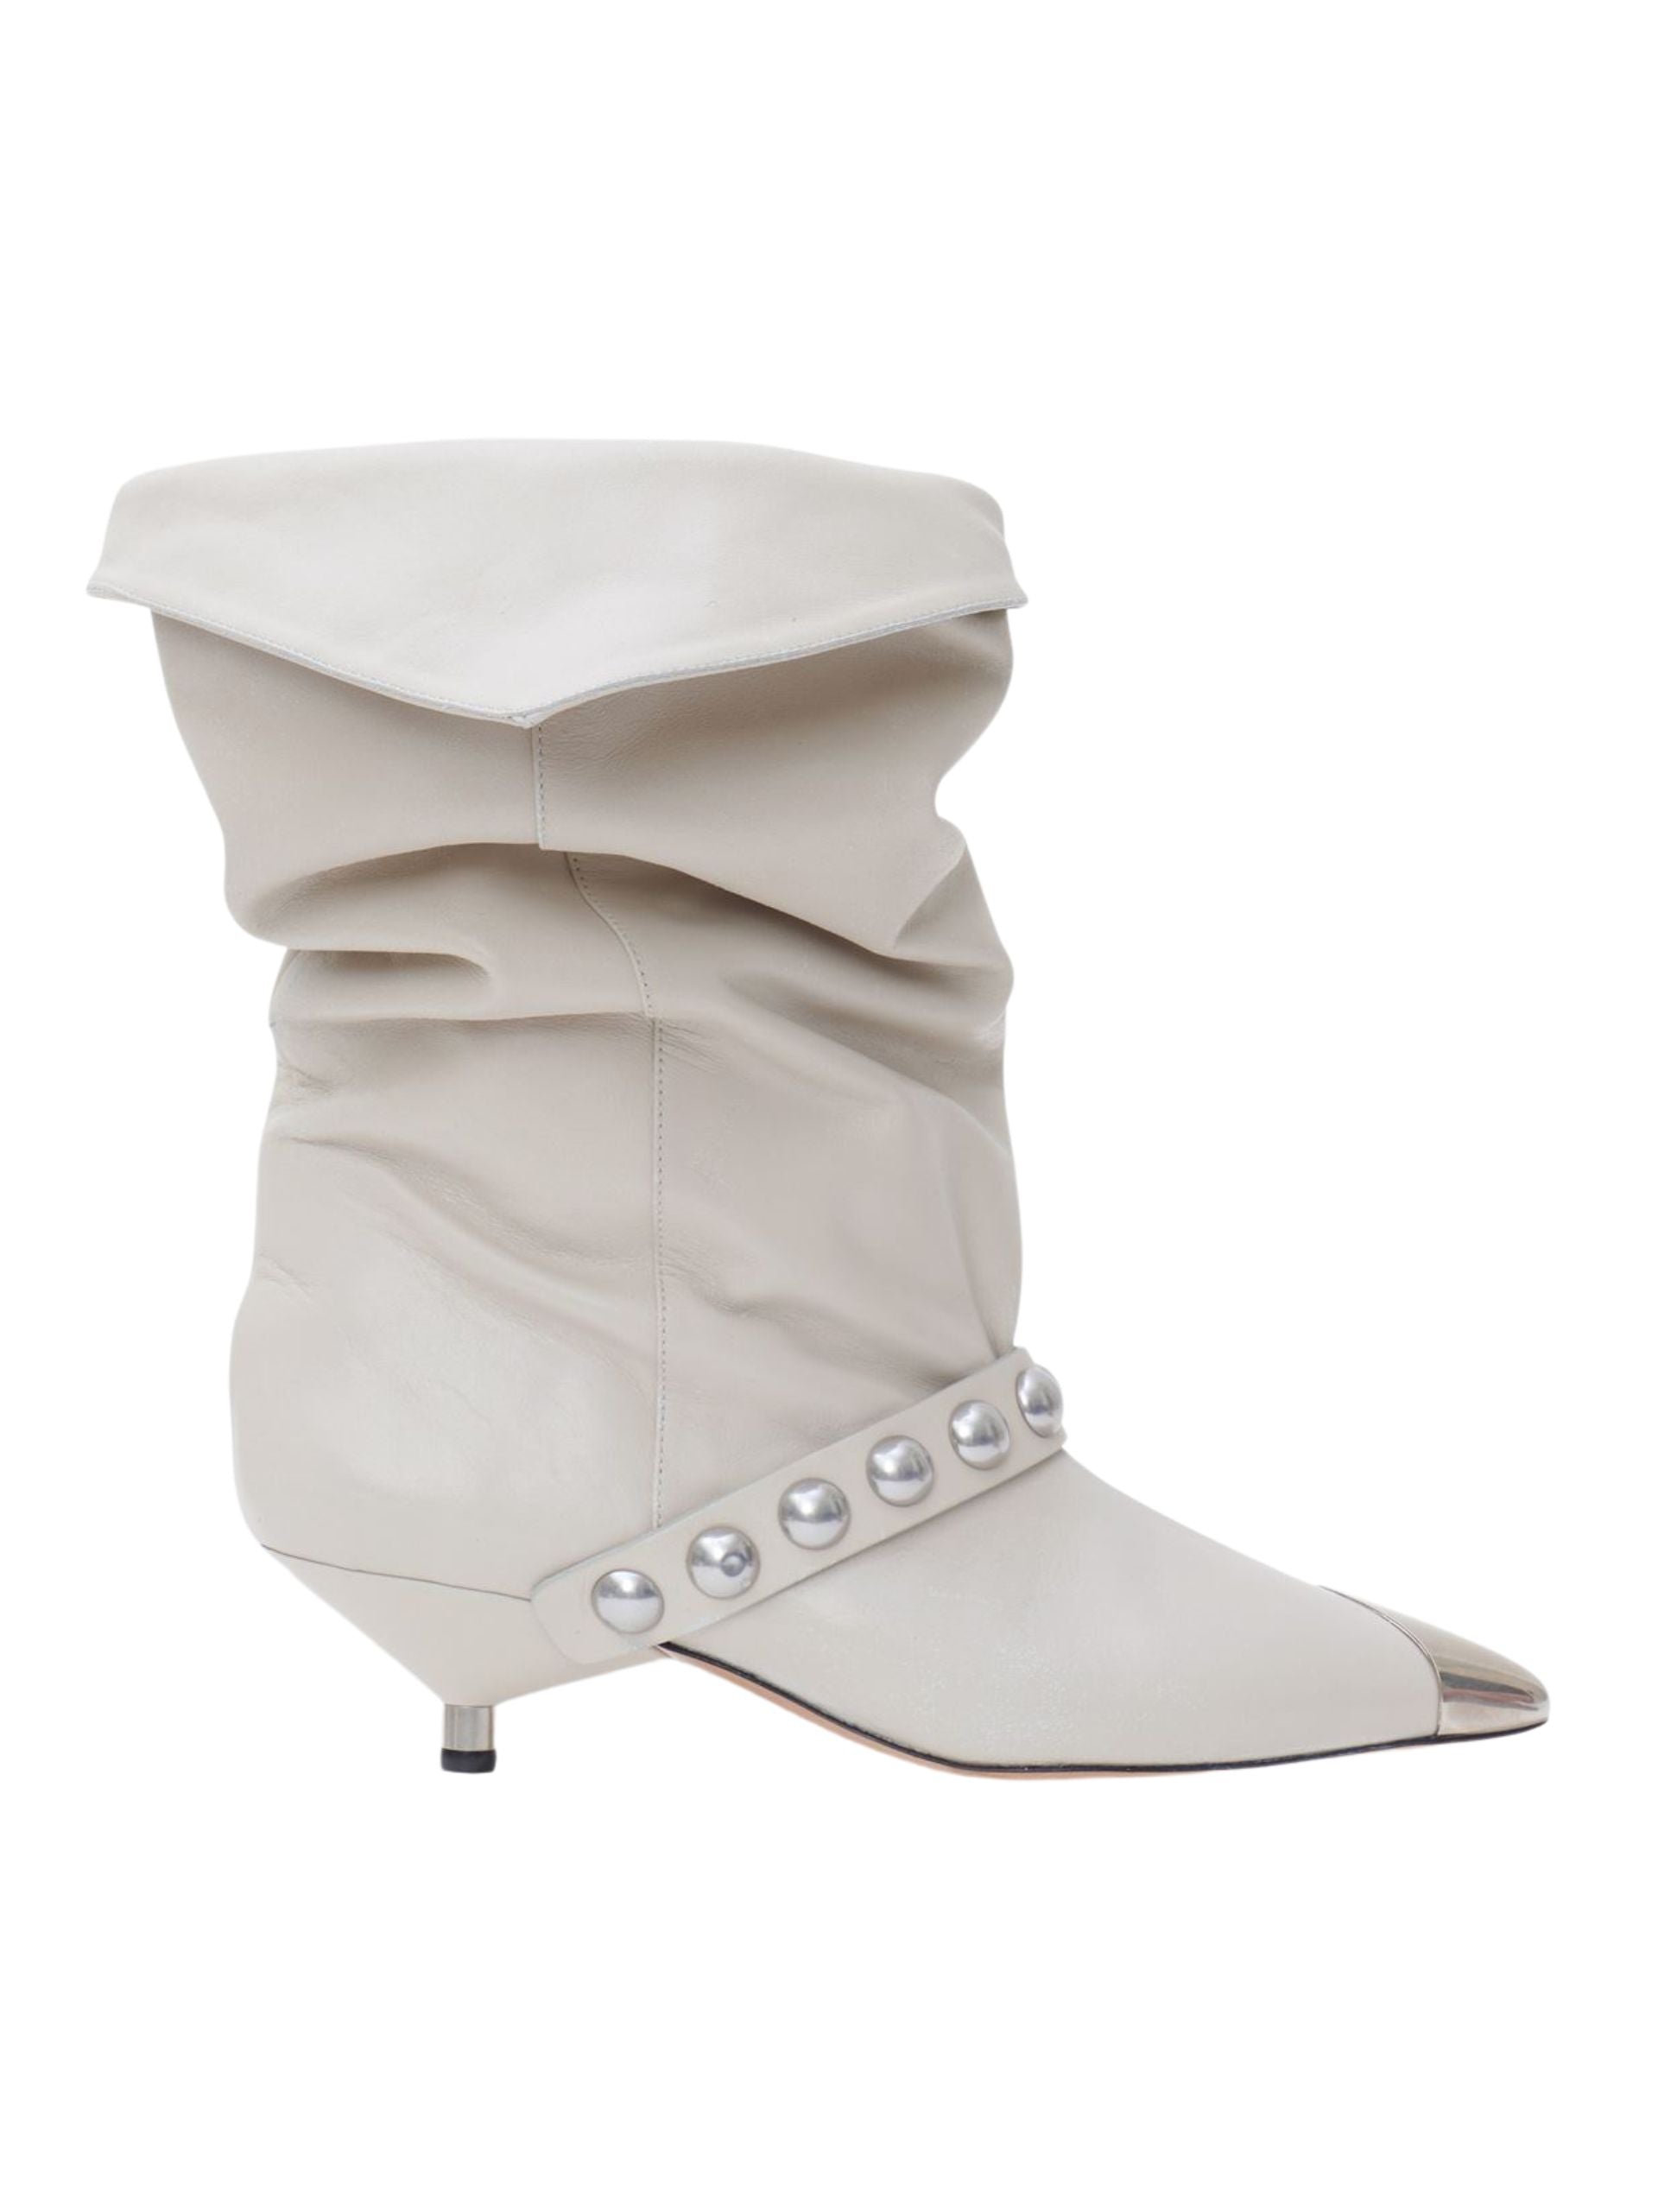 Leabys Boots / White Womens Isabel Marant 